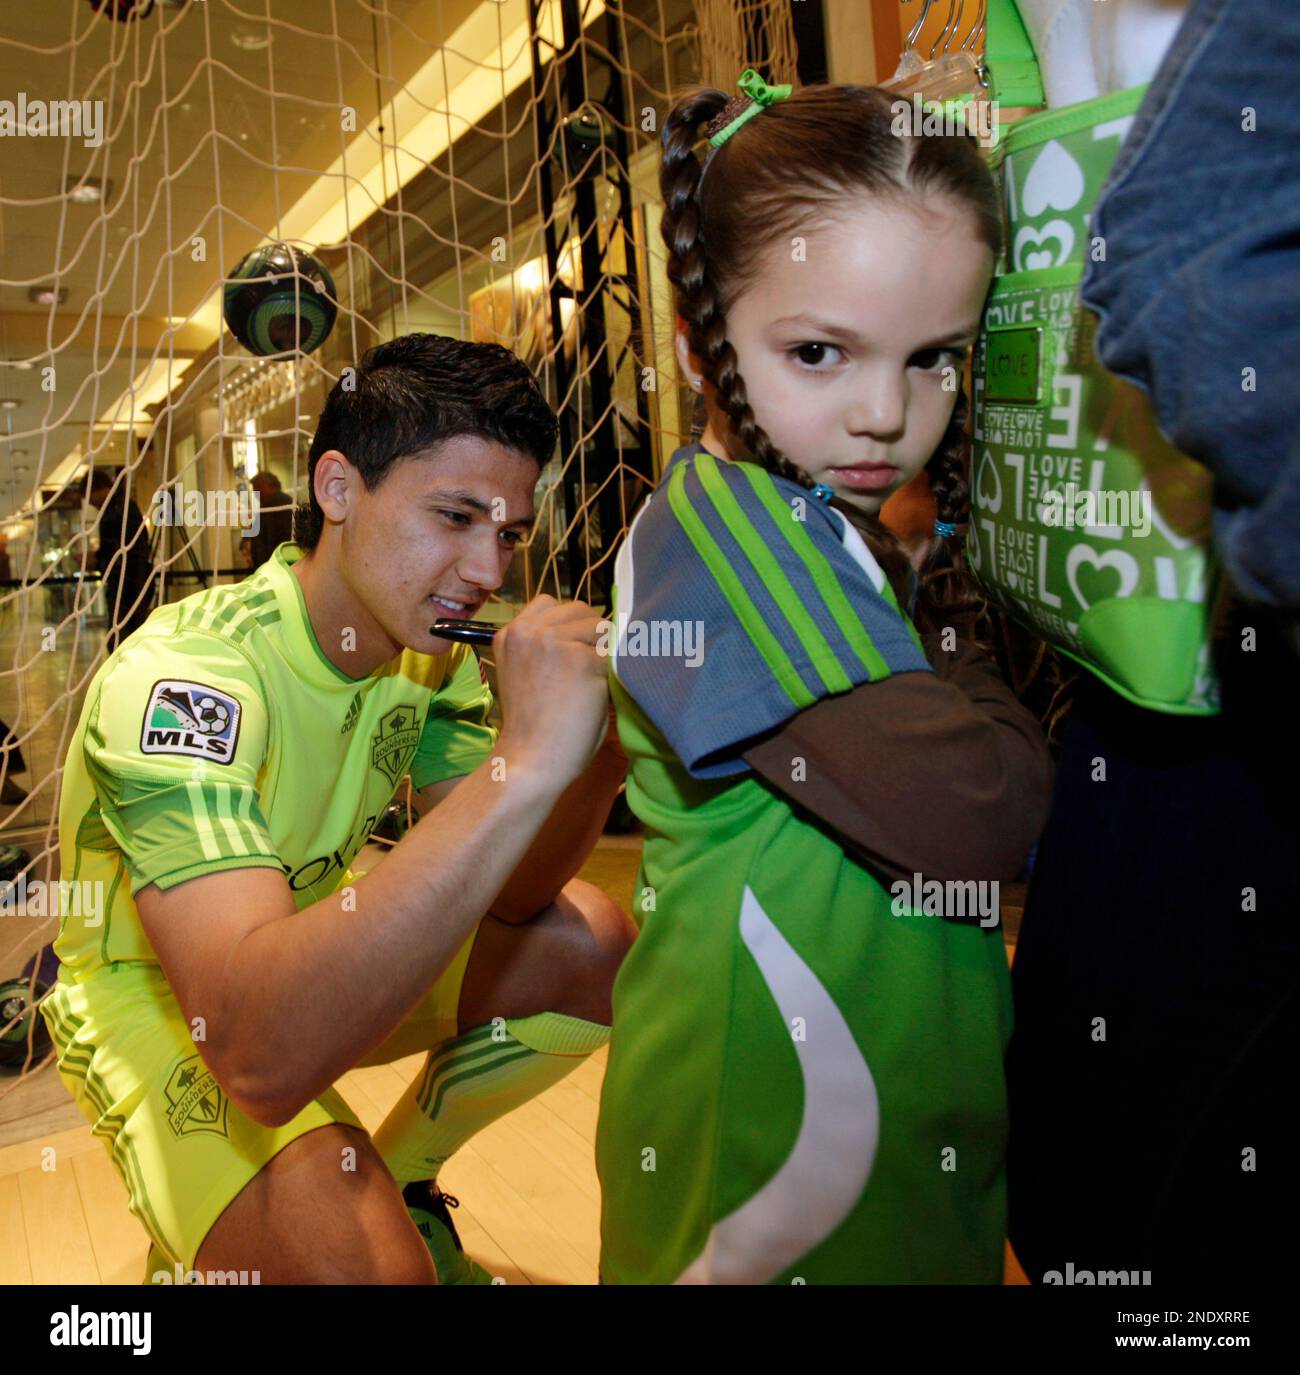 Seattle Sounders MLS soccer player Fredy Montero, of Colombia, signs the  jersey of Angelina Lucero, 4, at an event debuting the team's new "third  kit" uniforms, Tuesday, April 20, 2010, at the